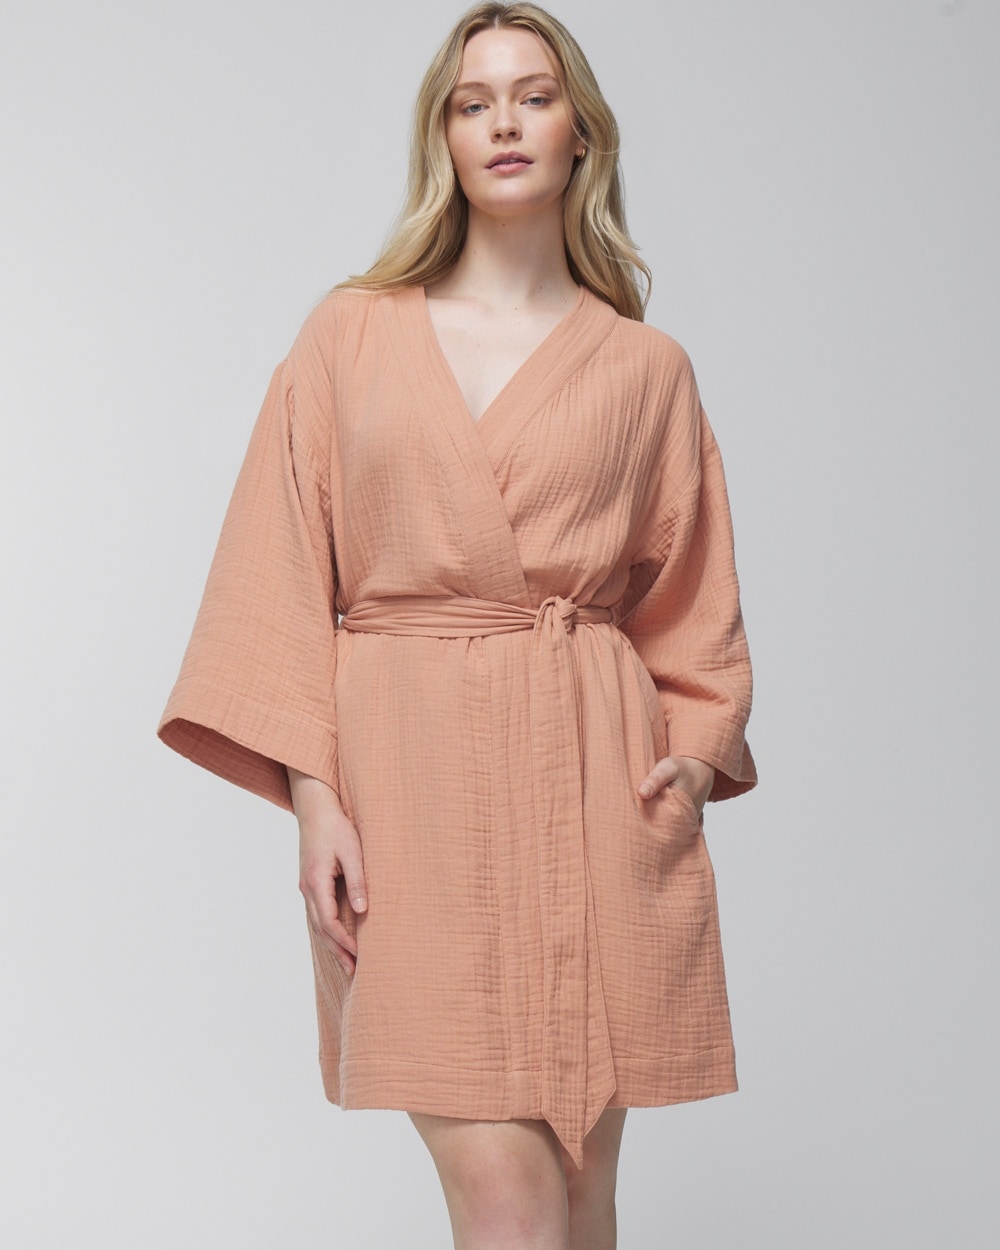 Soma Women's Textured Cotton Robe In Nude Size Large/xl |